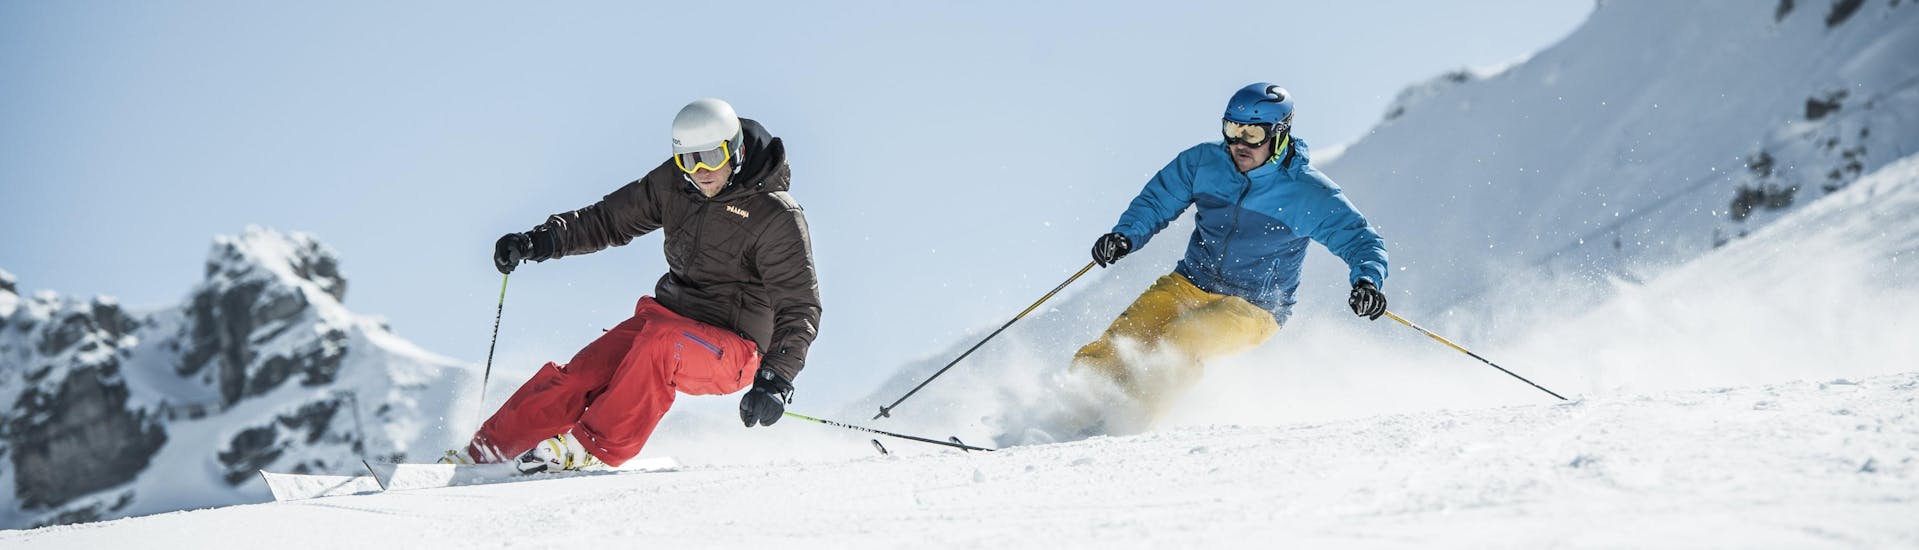 A skier practices the correct skiing technique during one of the private lessons in Pra Loup.